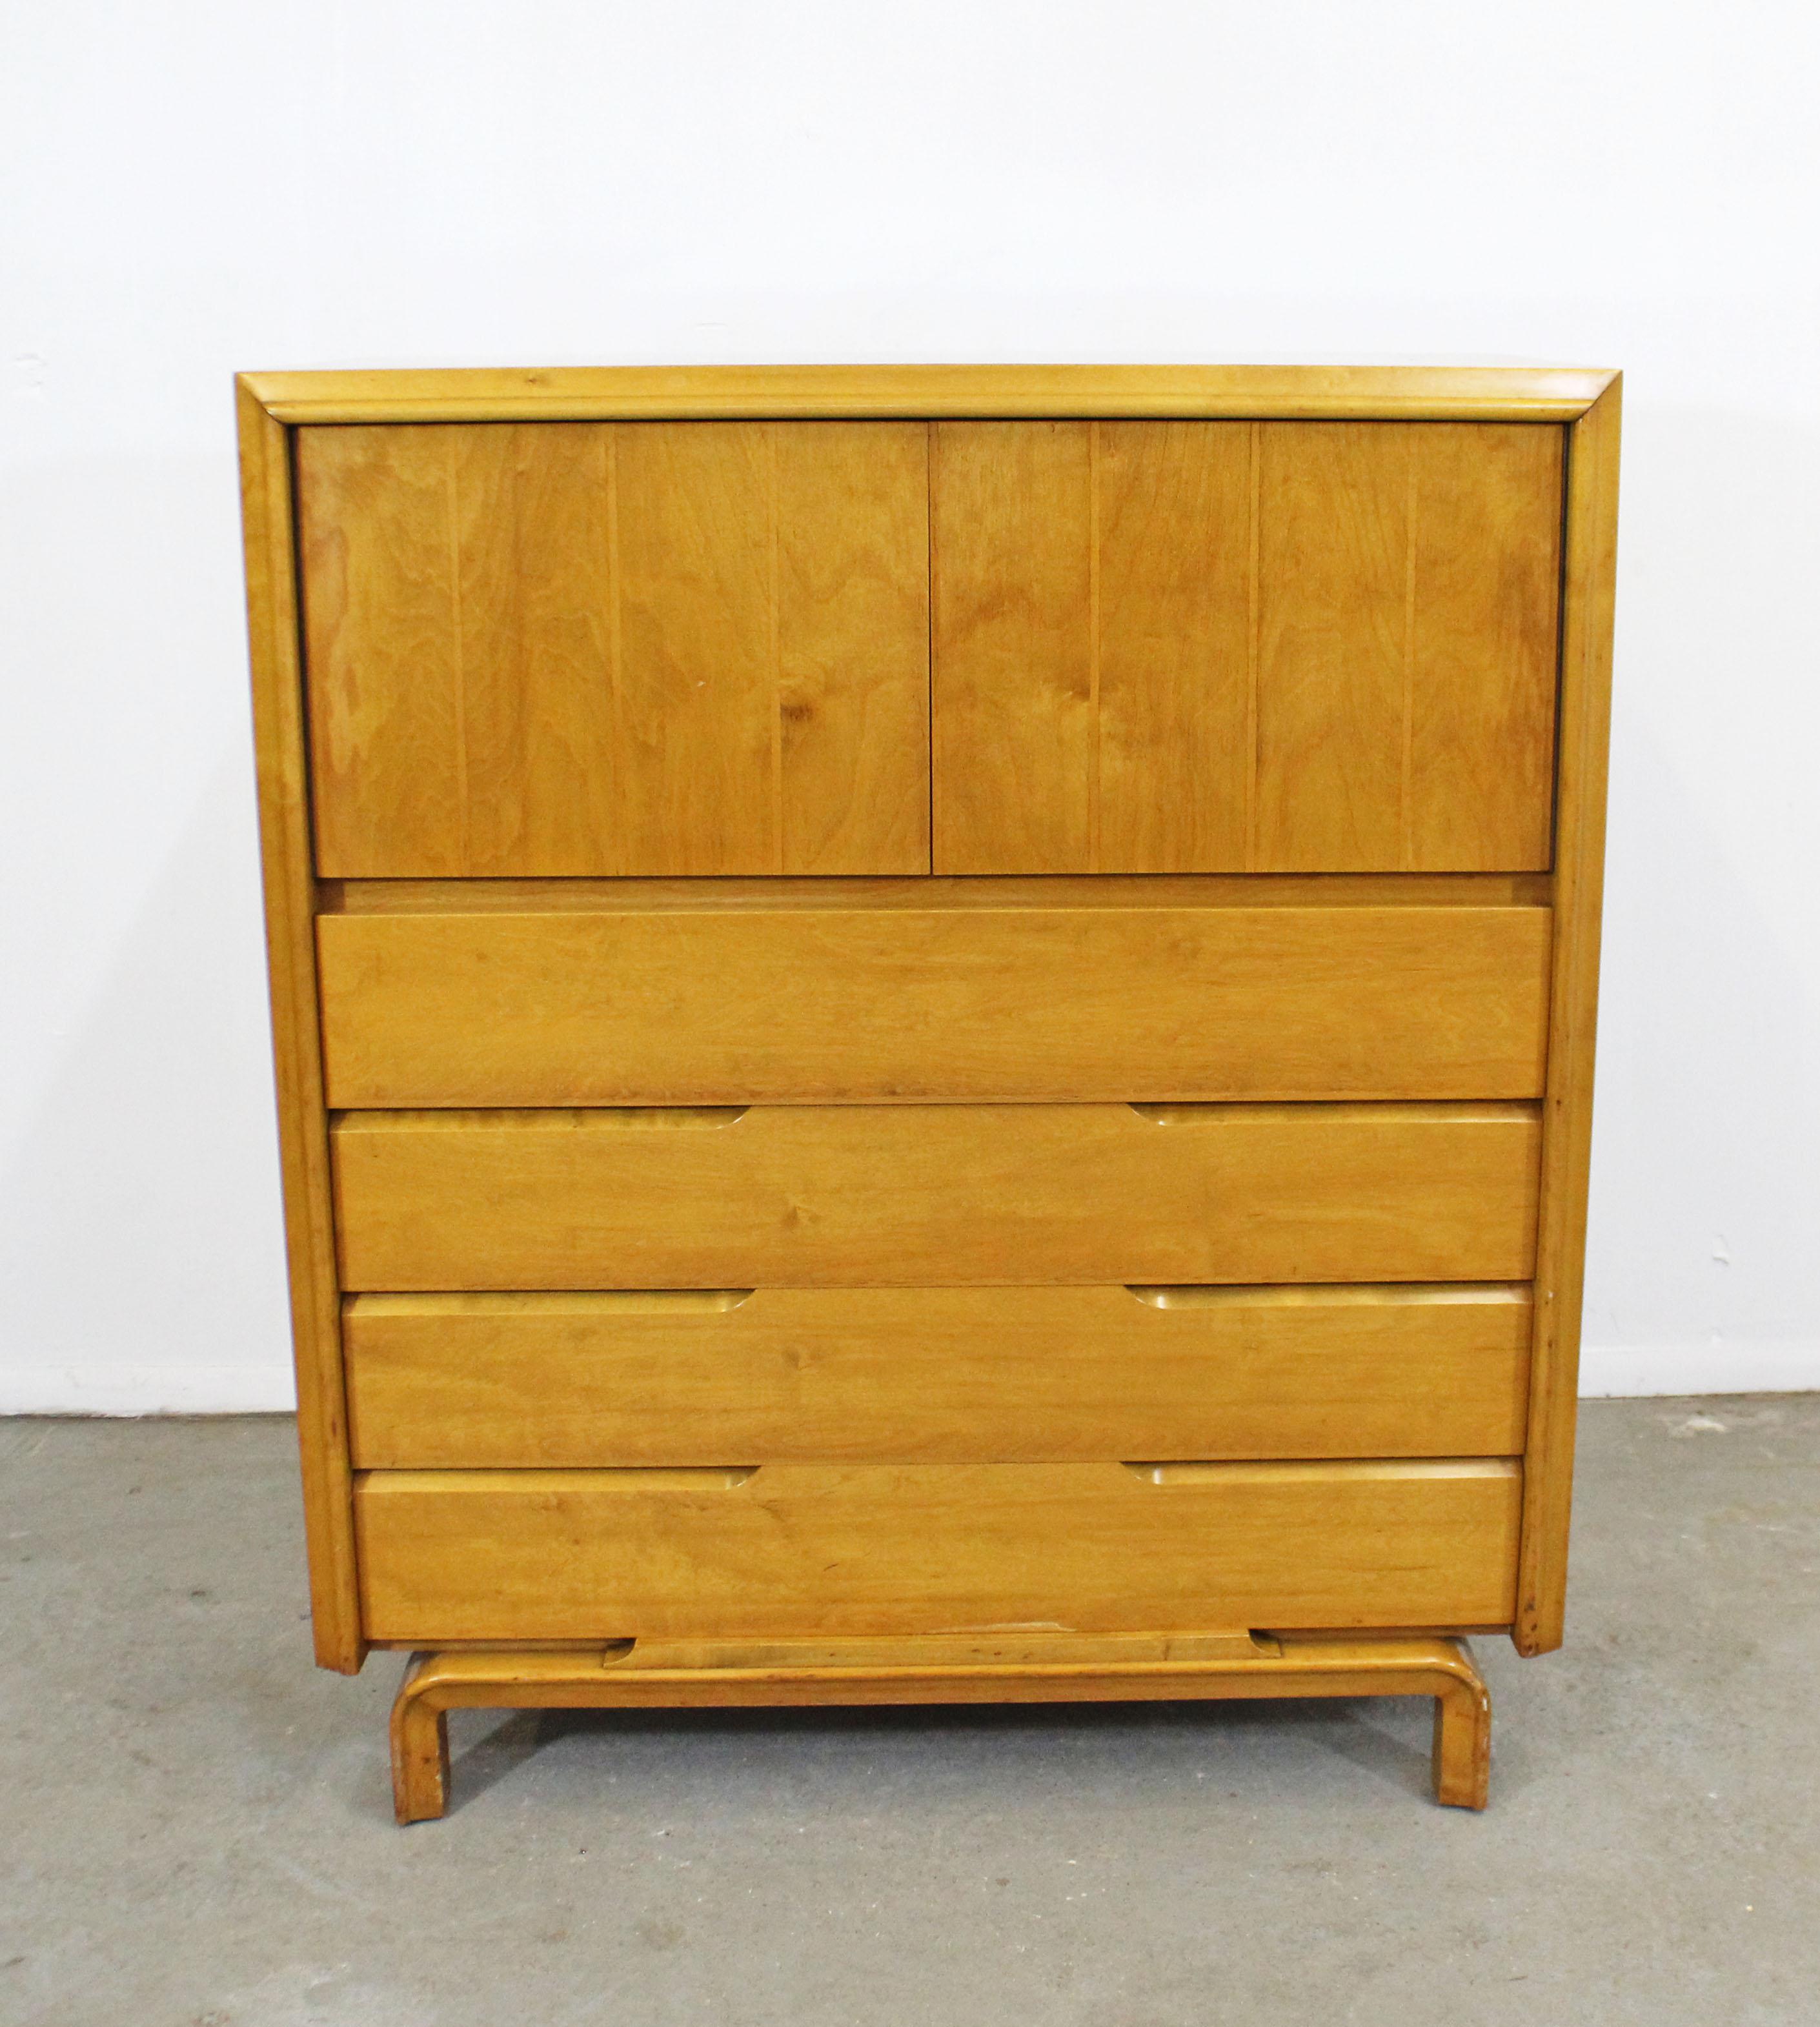 Offered is a beautiful Mid-Century Modern tall chest with ample storage space which was designed by American designer Edmond J. Spence. Features four bottom drawers and two doors with three inner storage compartments. Looks to be made of birch or